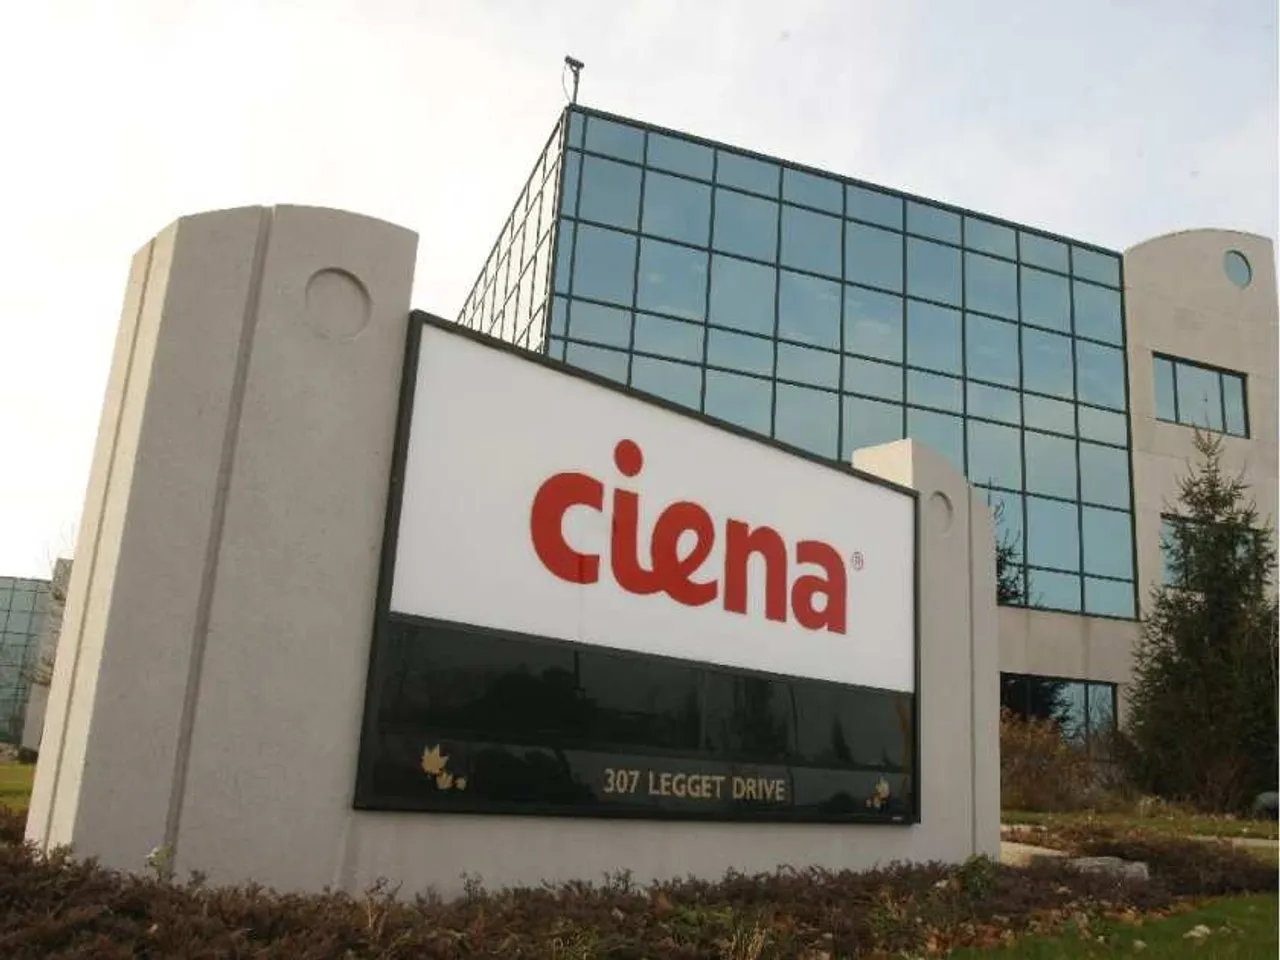 RCom deploys Ciena’s packet networking solutions to enable high-capacity ethernet services